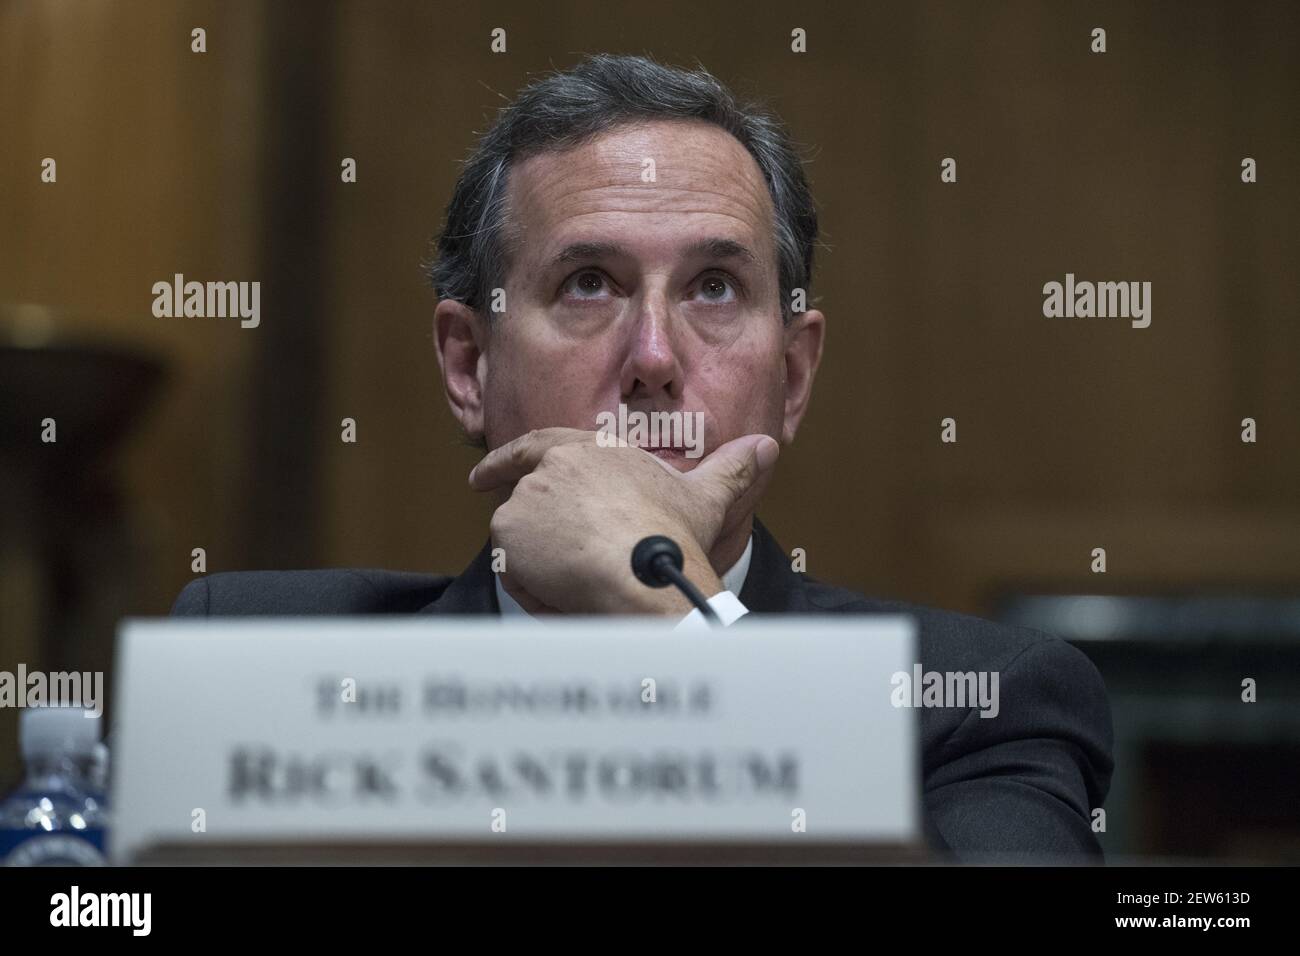 UNITED STATES - SEPTEMBER 25: Former Sen. Rick Santorum, R-Pa., testifies during a Senate Finance Committee hearing on the proposal by Sens. Bill Cassidy, R-La., Sen. Lindsey Graham, R-S.C., to repeal and replace the Affordable Care Act on September 25, 2017. (Photo By Tom Williams/CQ Roll Call) Stock Photo